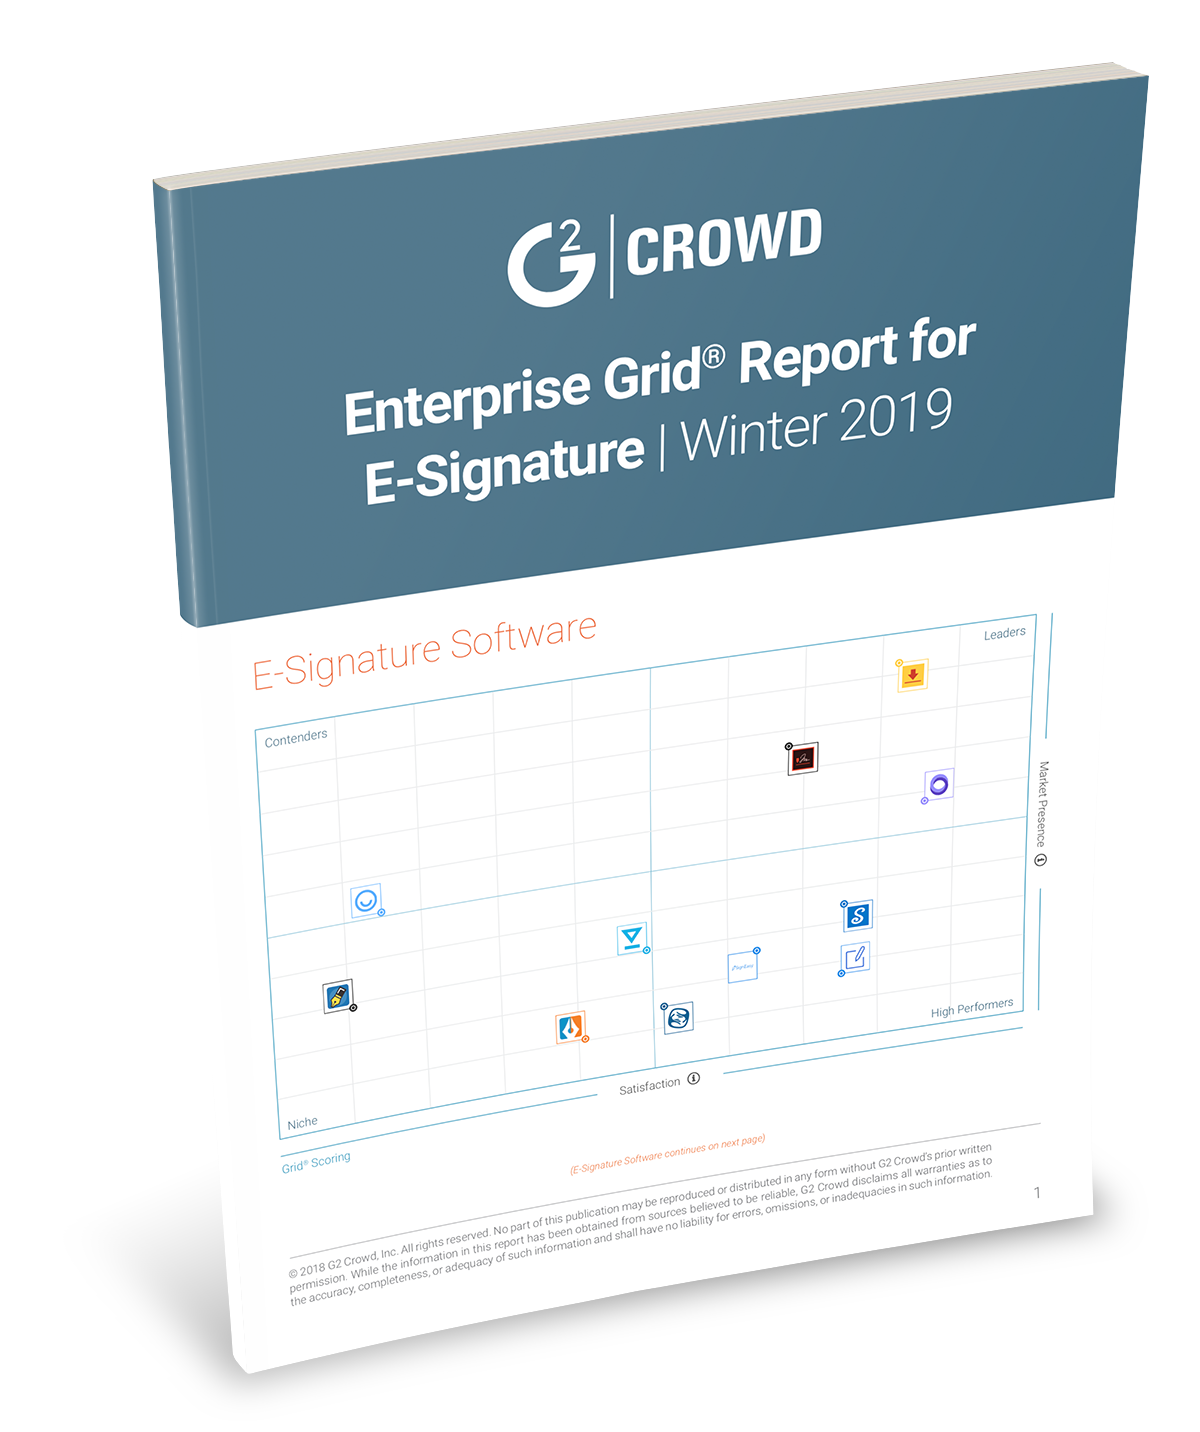 G2 Crowd Electronic Signature Software Rankings Winter 2019